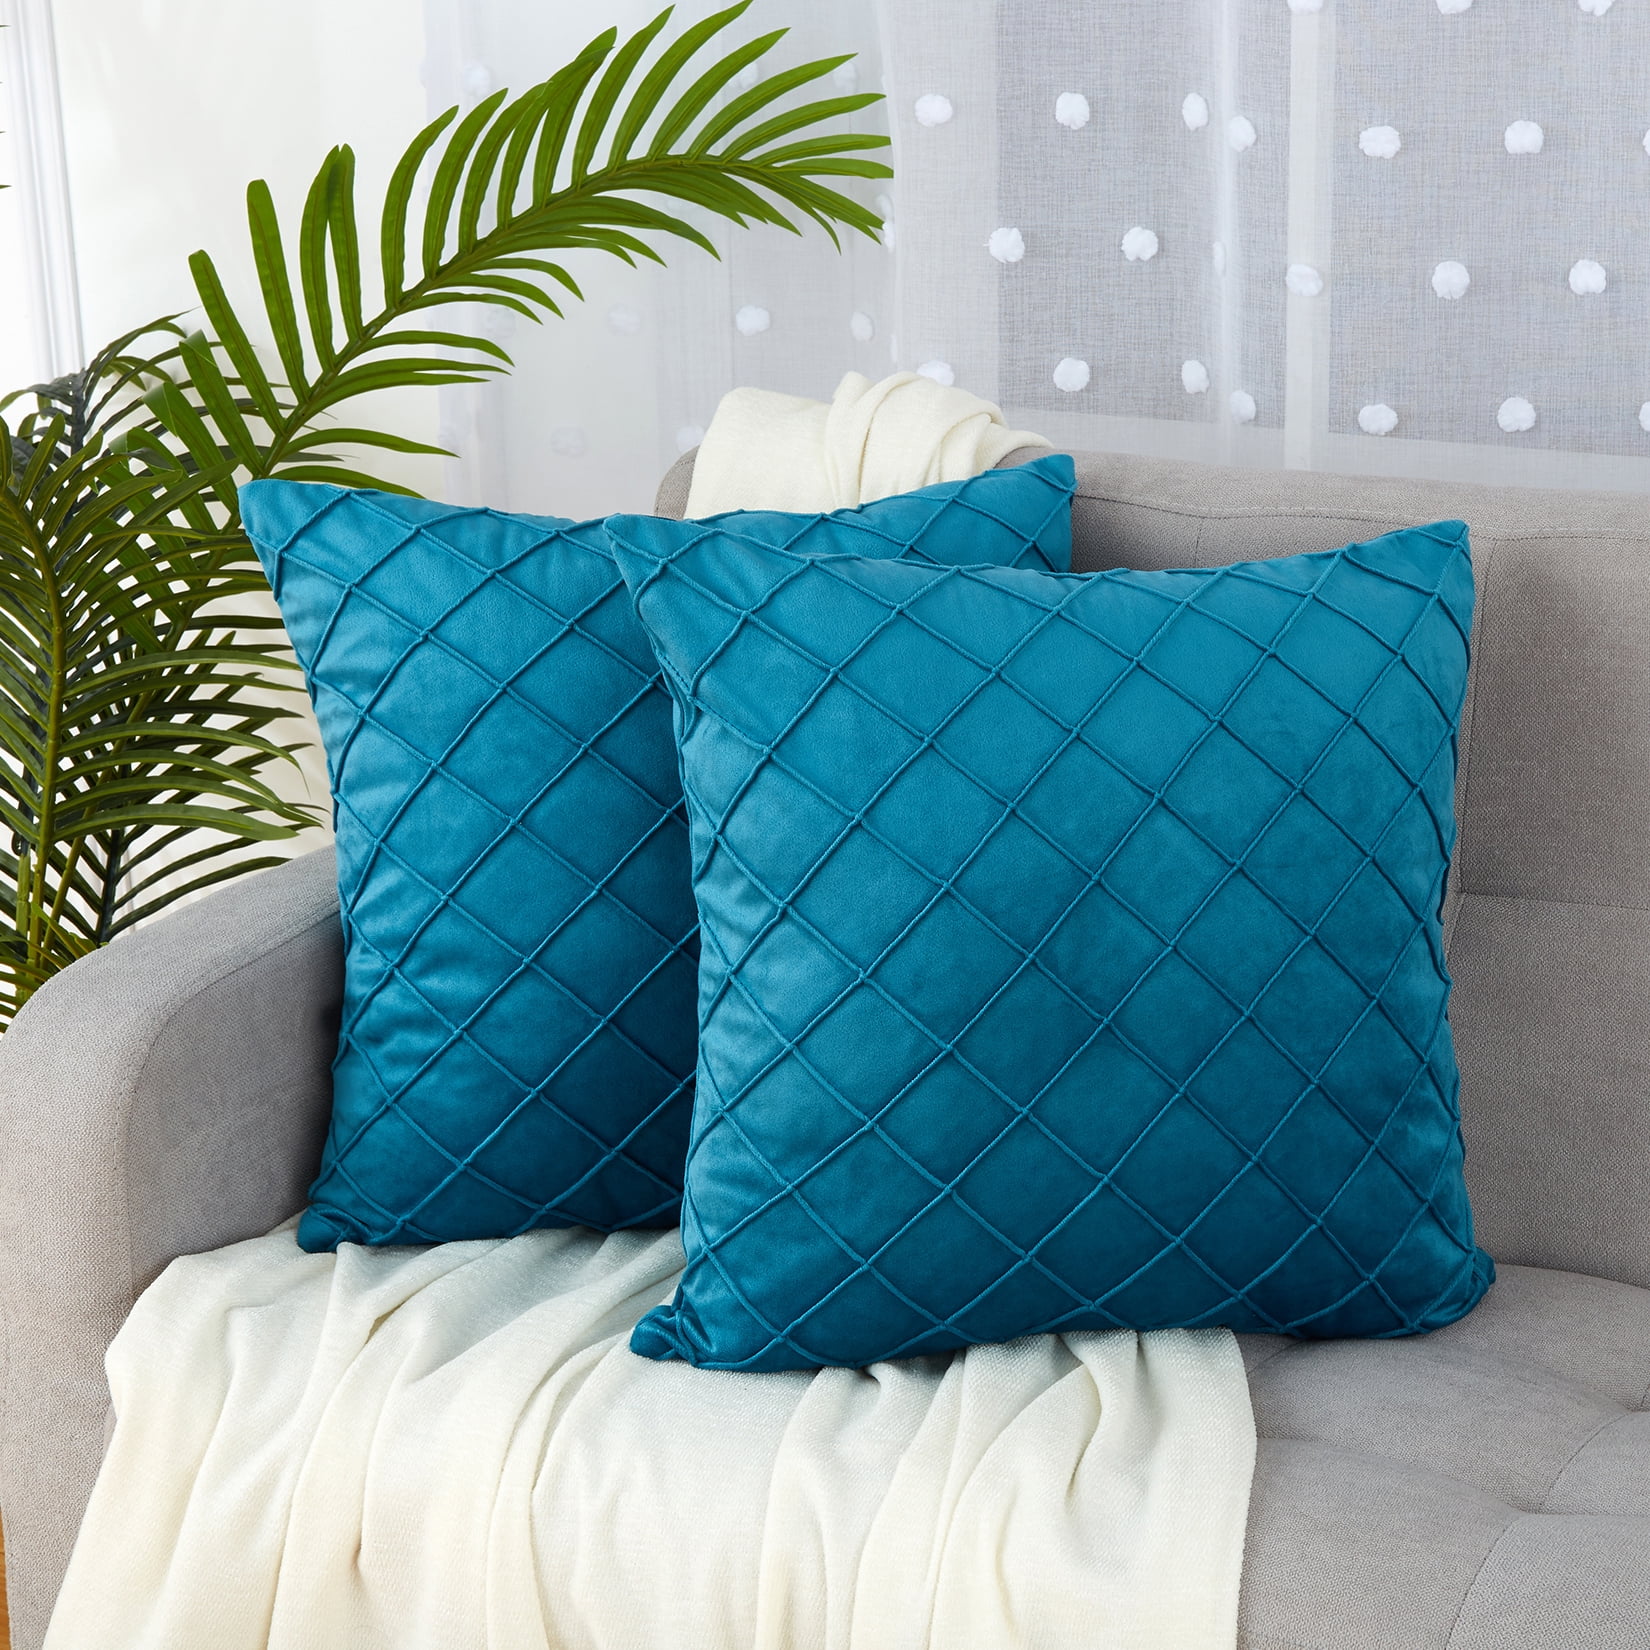 GlowSol 18 x 18 Decorative Velvet Pillow Covers Square Soft Geometric  Pleated Checkered Throw Cushion Cases Modern Pillowcases for Sofa Couch,  Teal, 2 Pack 